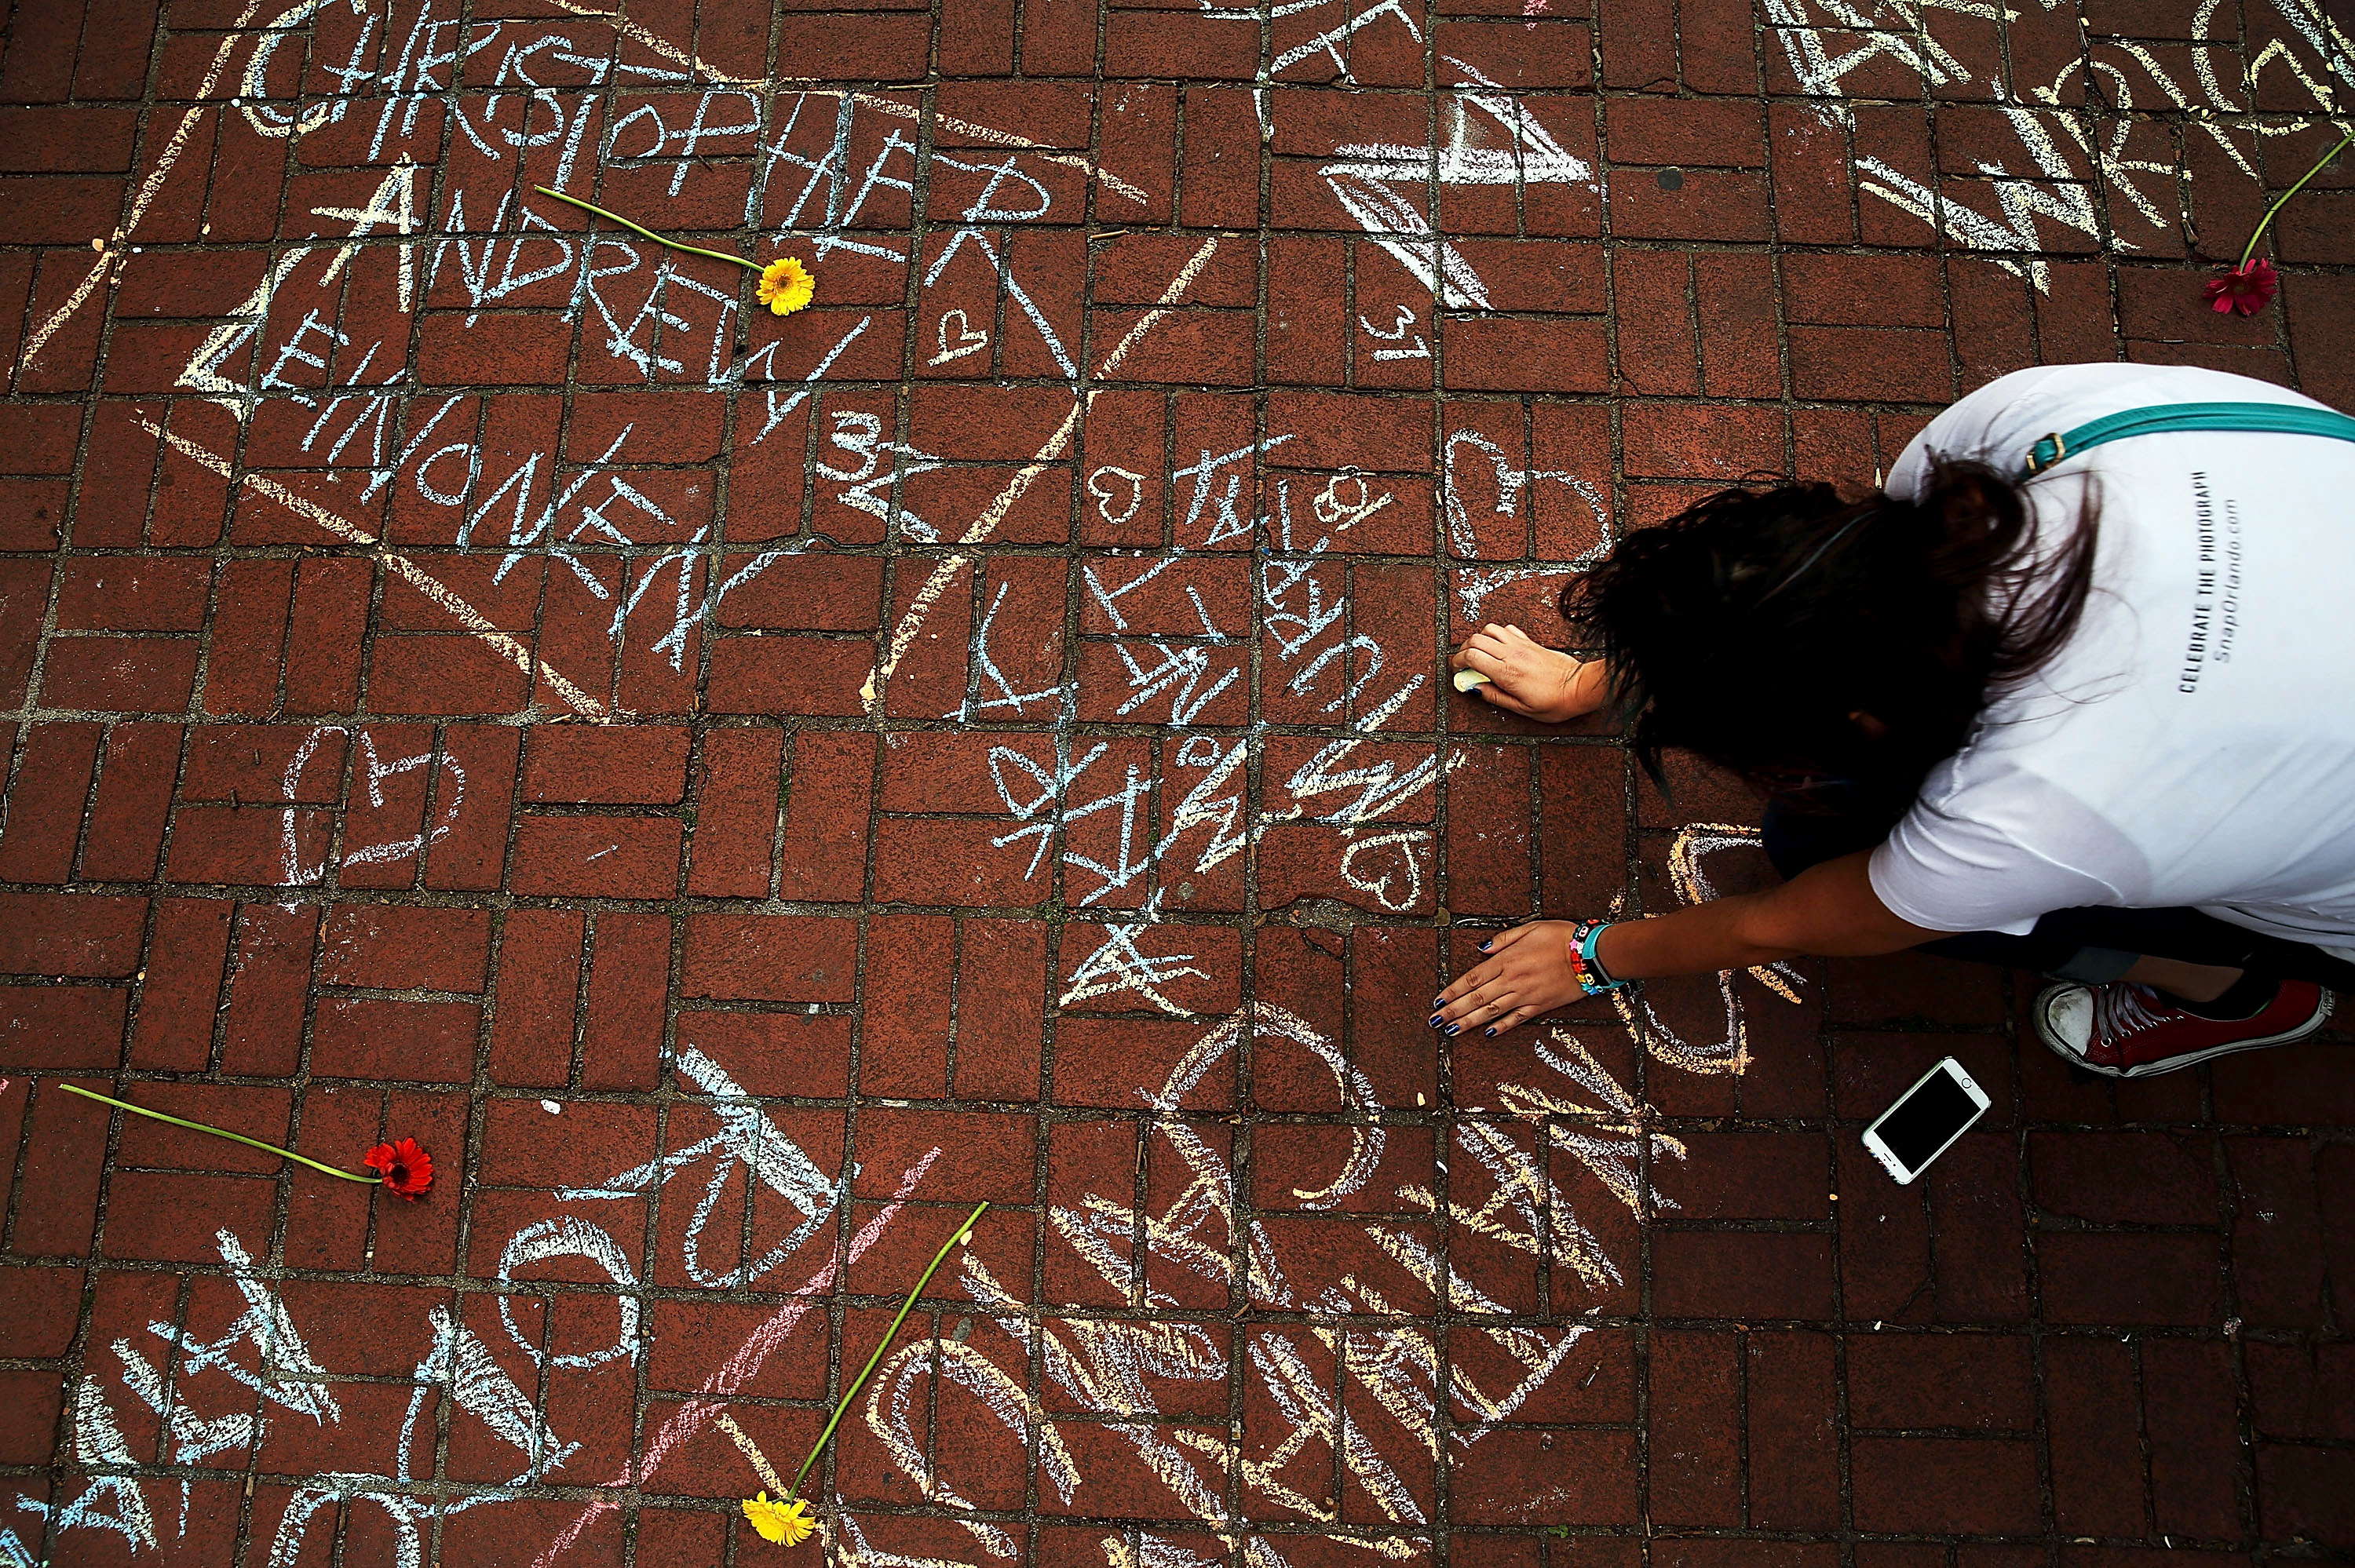 A woman pauses while writing the names of shooting victims in chalk in a park across from the iconic New York City gay and lesbian bar, The Stonewall Inn, on June 13, 2016 in New York City.